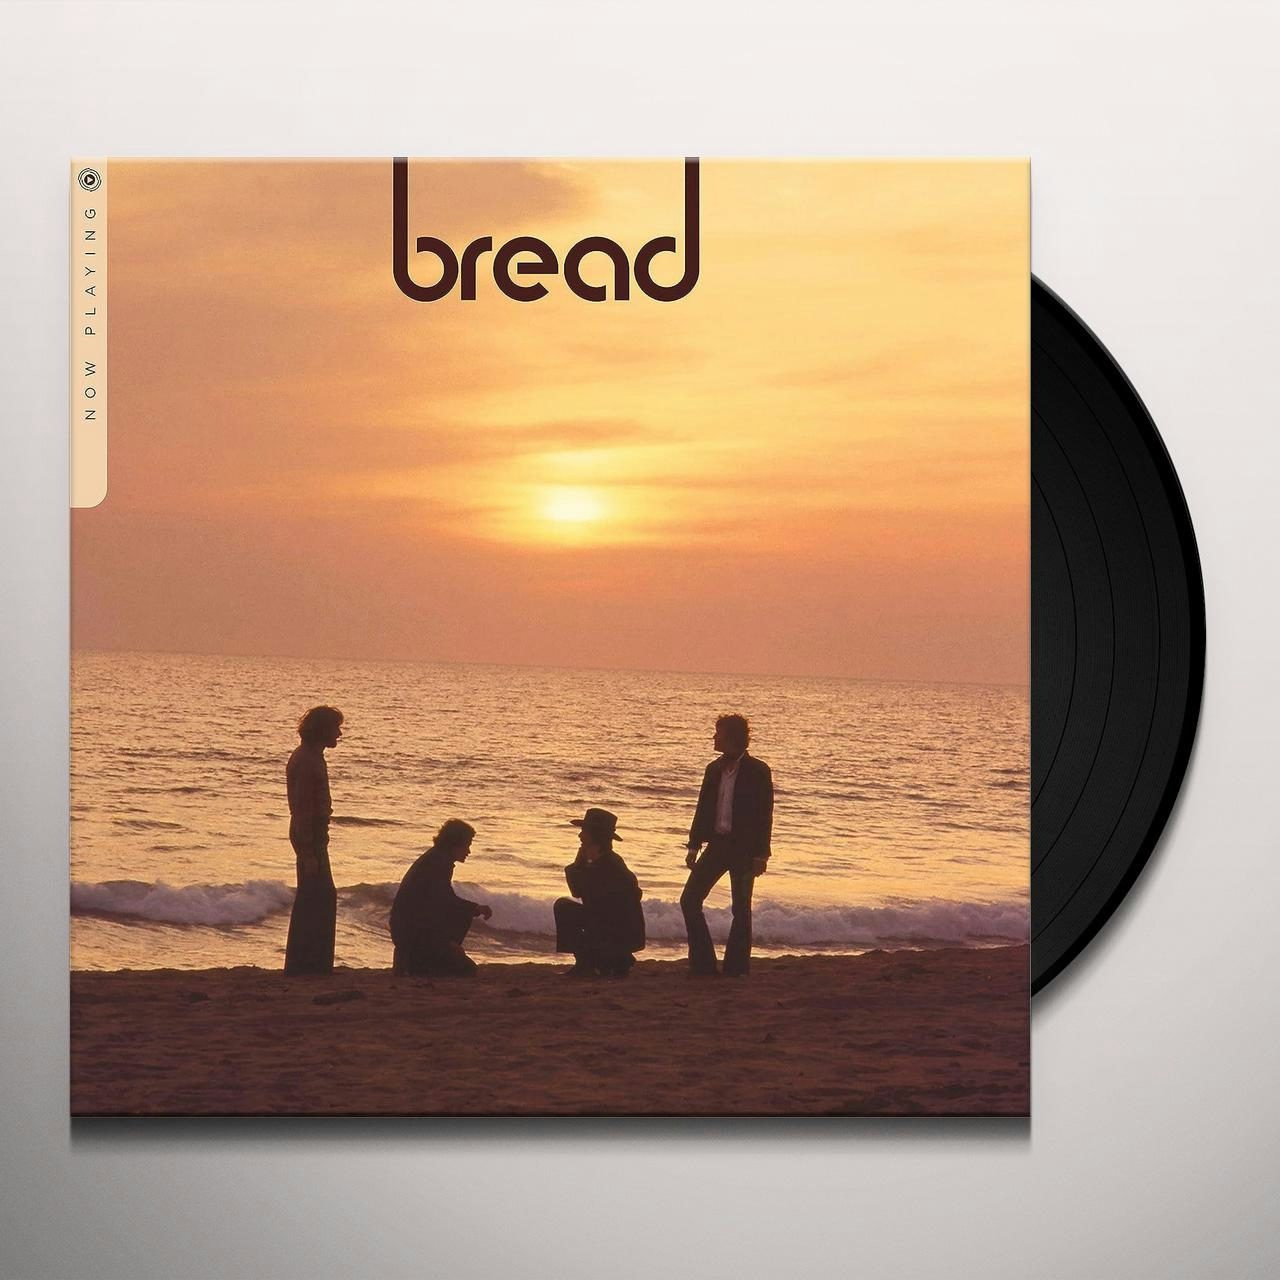 BABY I'M-A WANT YOU (180G) Vinyl Record - Bread